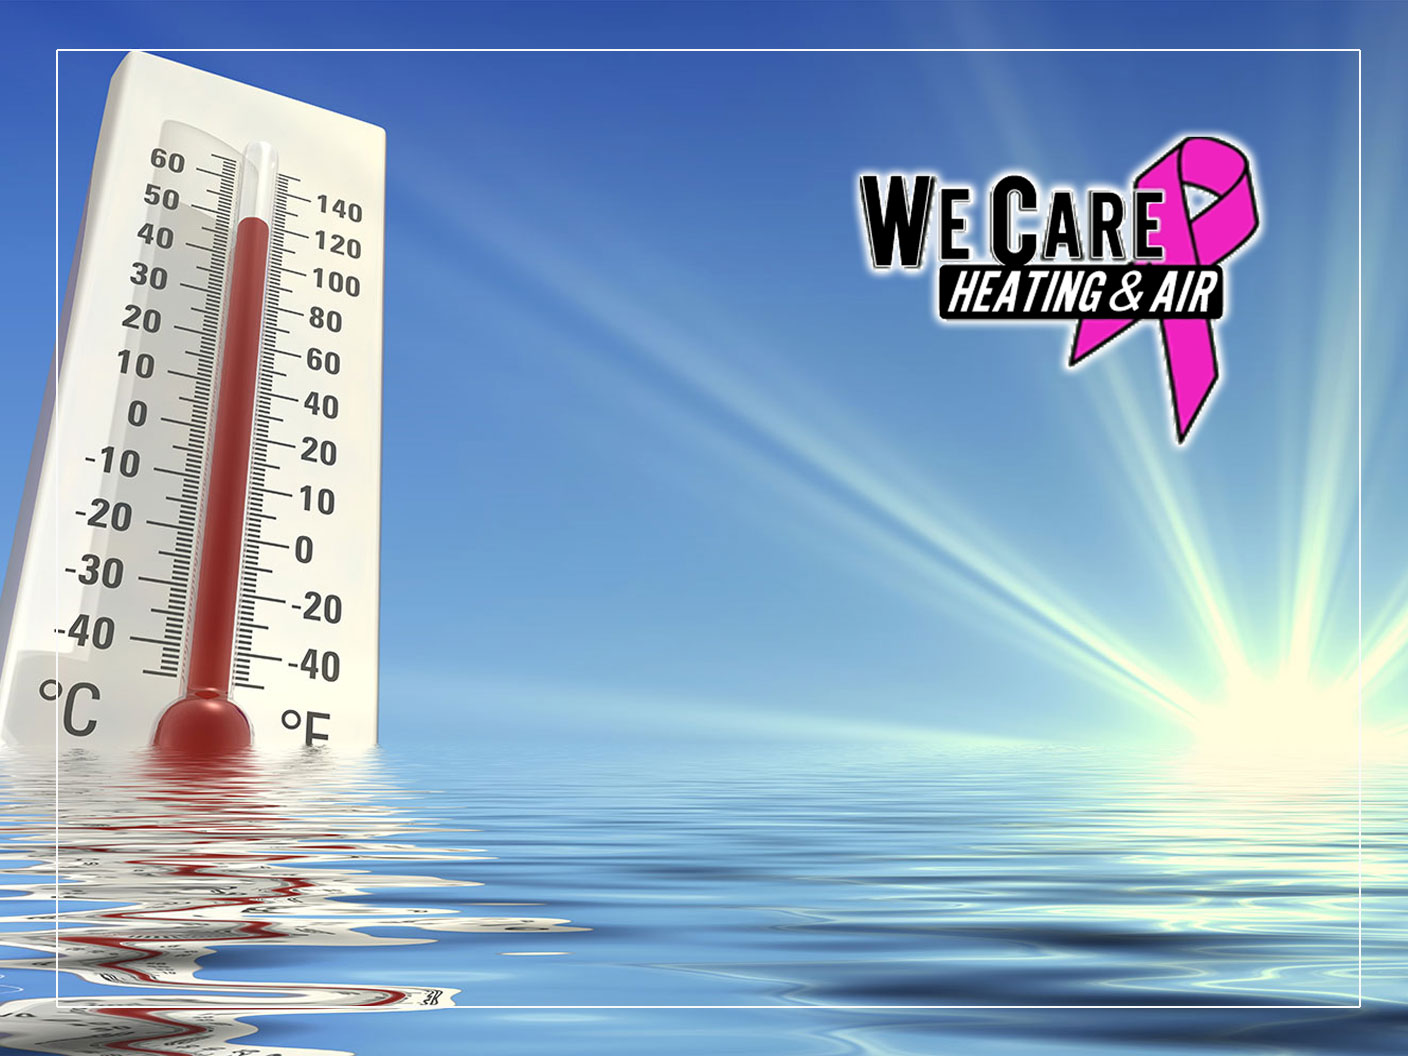 We Care Heating & Air